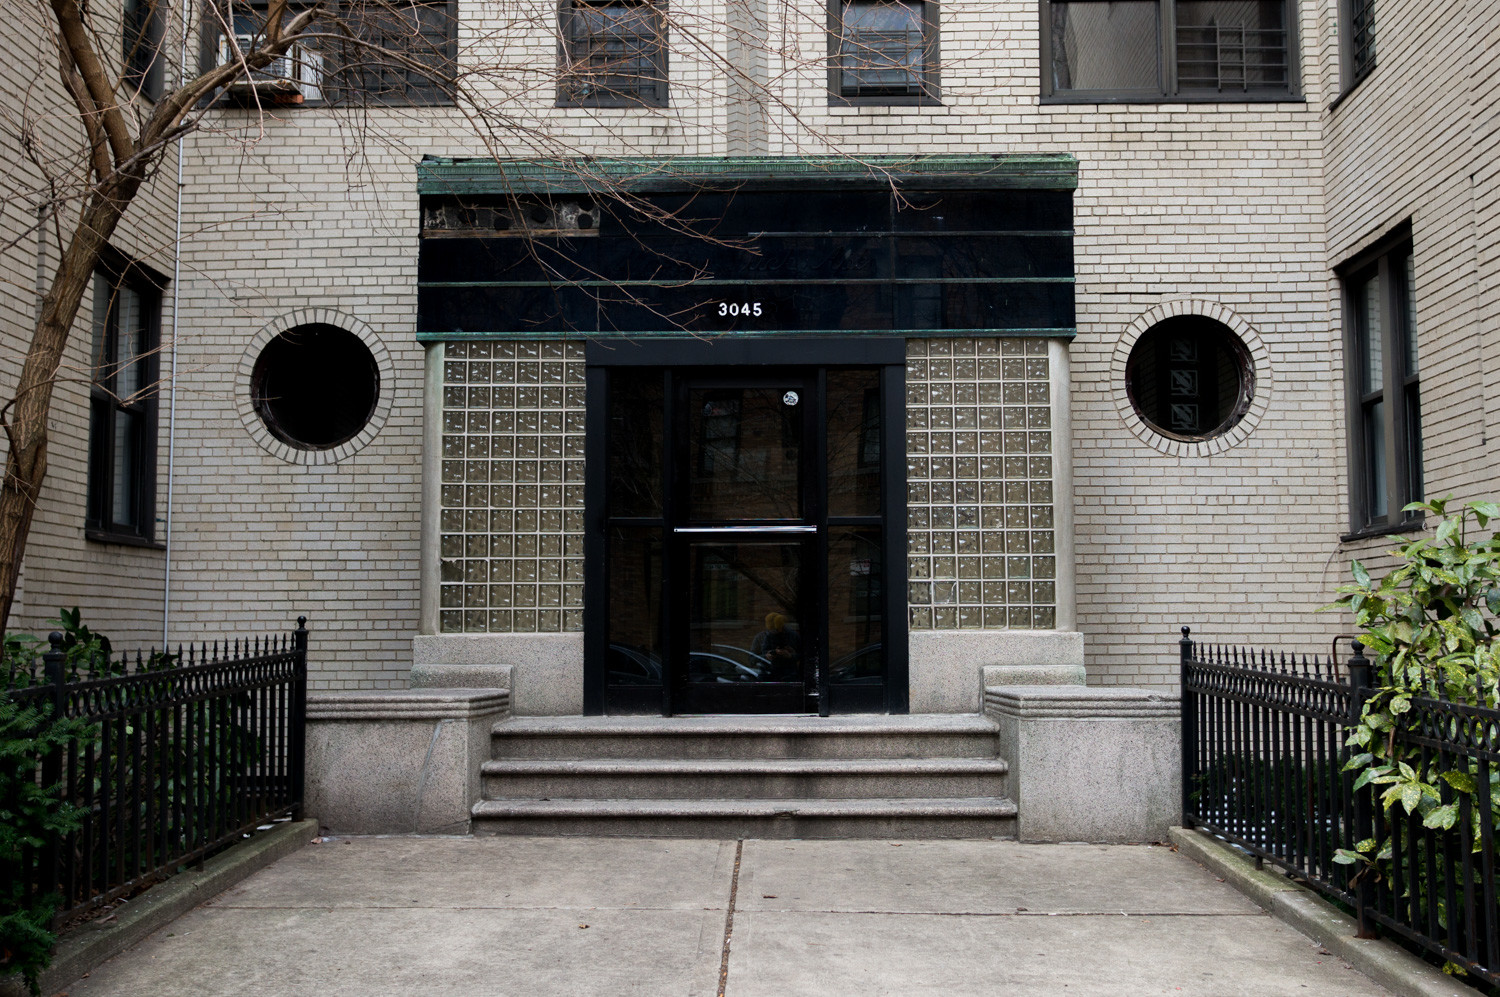 Tenants at 3045 Godwin Terrace have joined renters in two other Bronx apartment buildings in separate class-action lawsuits claiming their landlords are violating the J-51 tax abatement program.